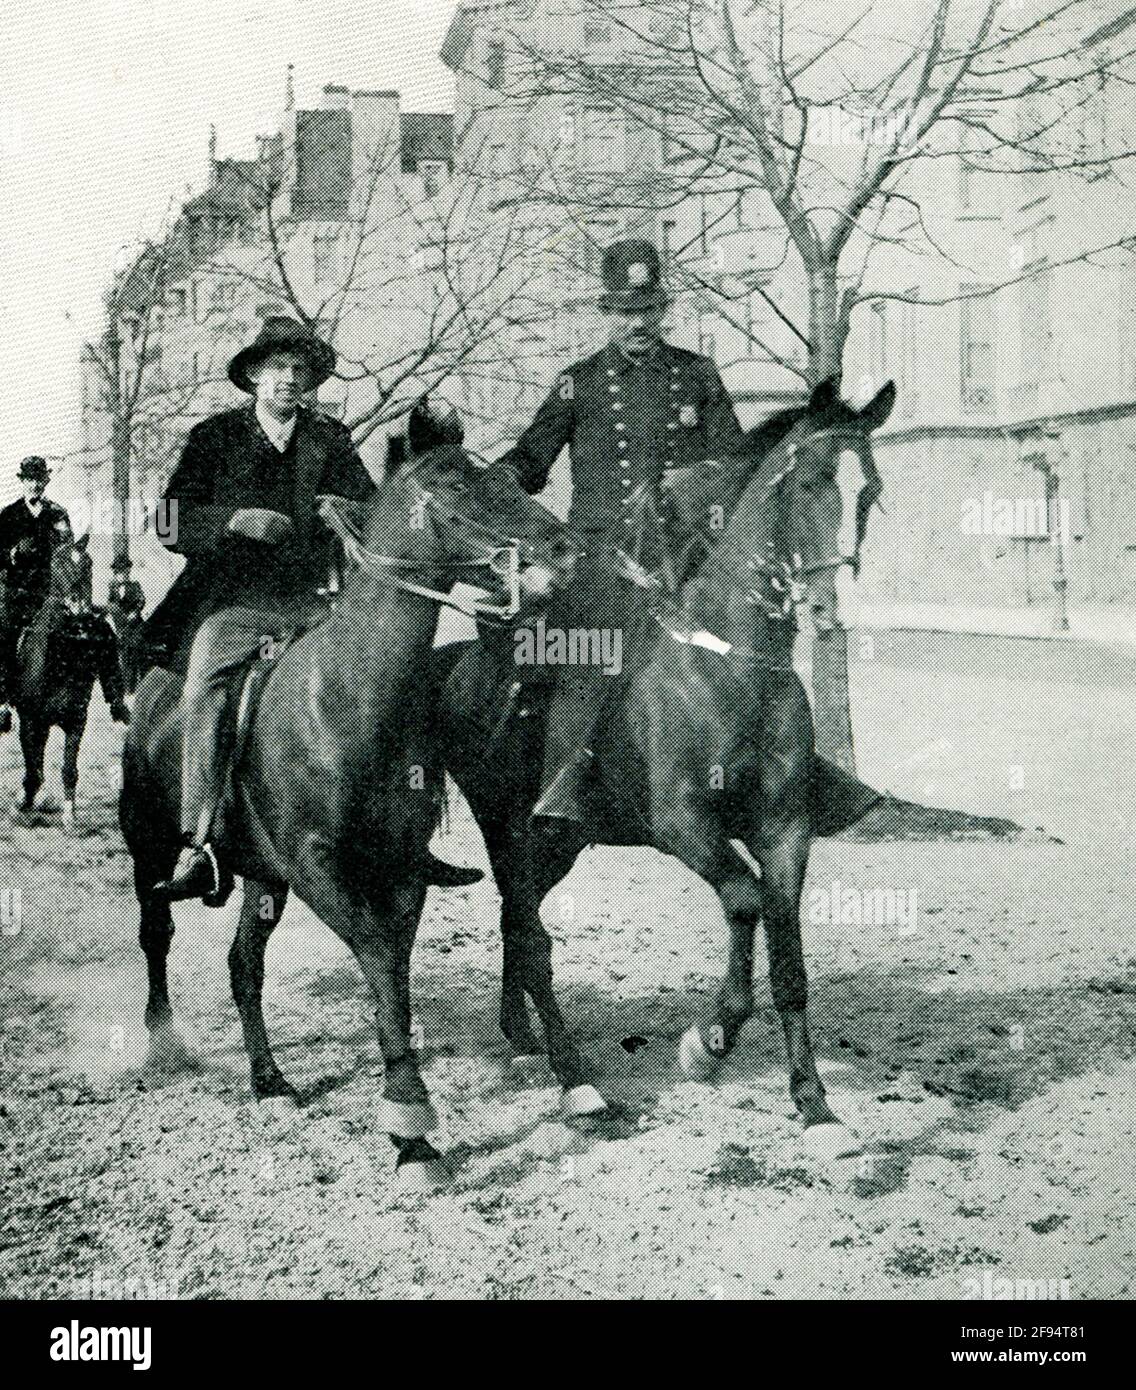 This 1903 photo shows a Mounted Police stopping a runaway horse. Stock Photo